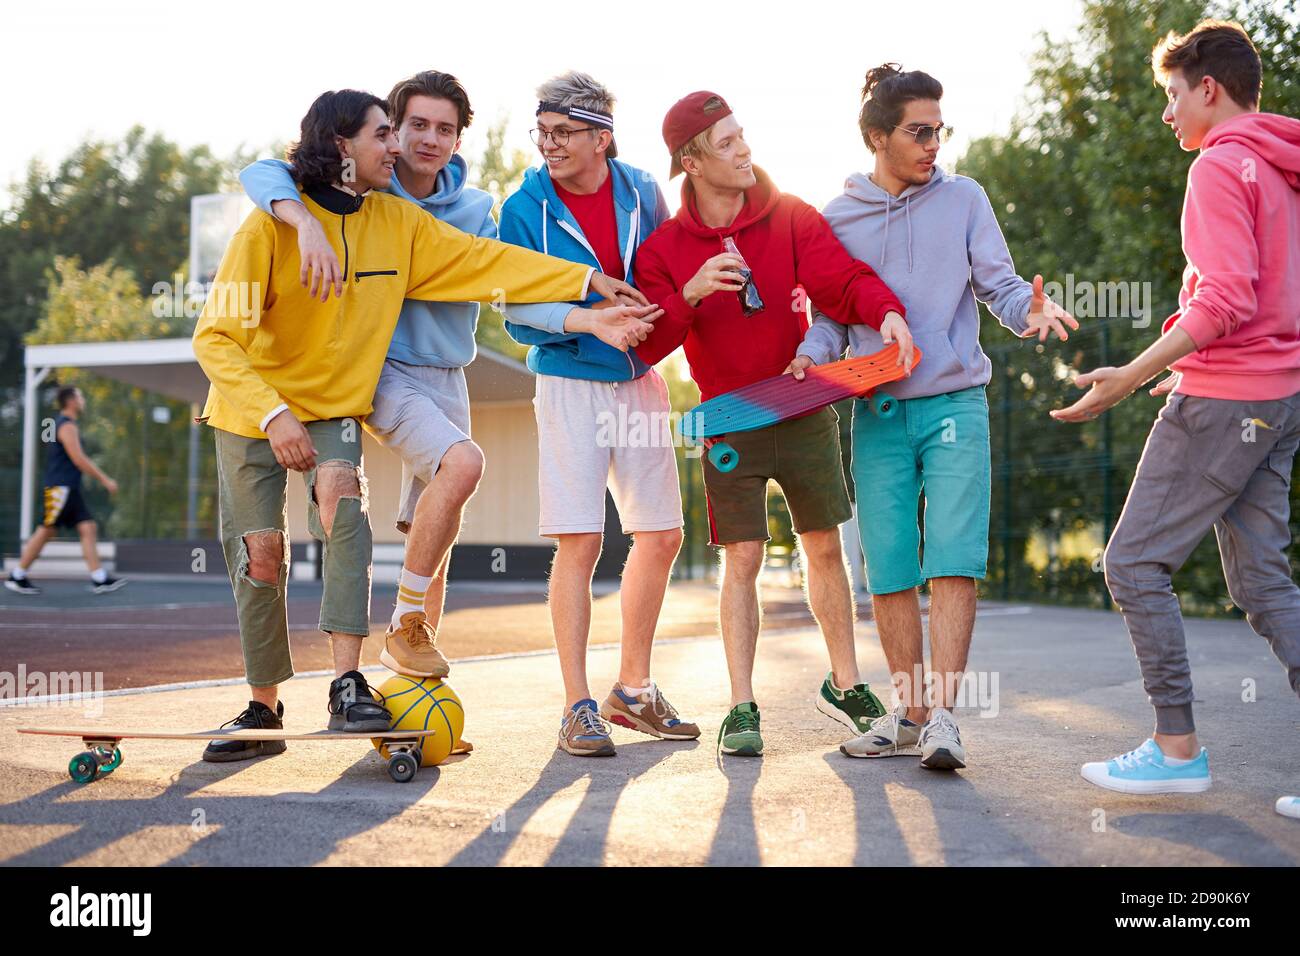 caucasian city teenagers have fun outdoors at sport playground, in the park. young boys in good mood, spend time together Stock Photo